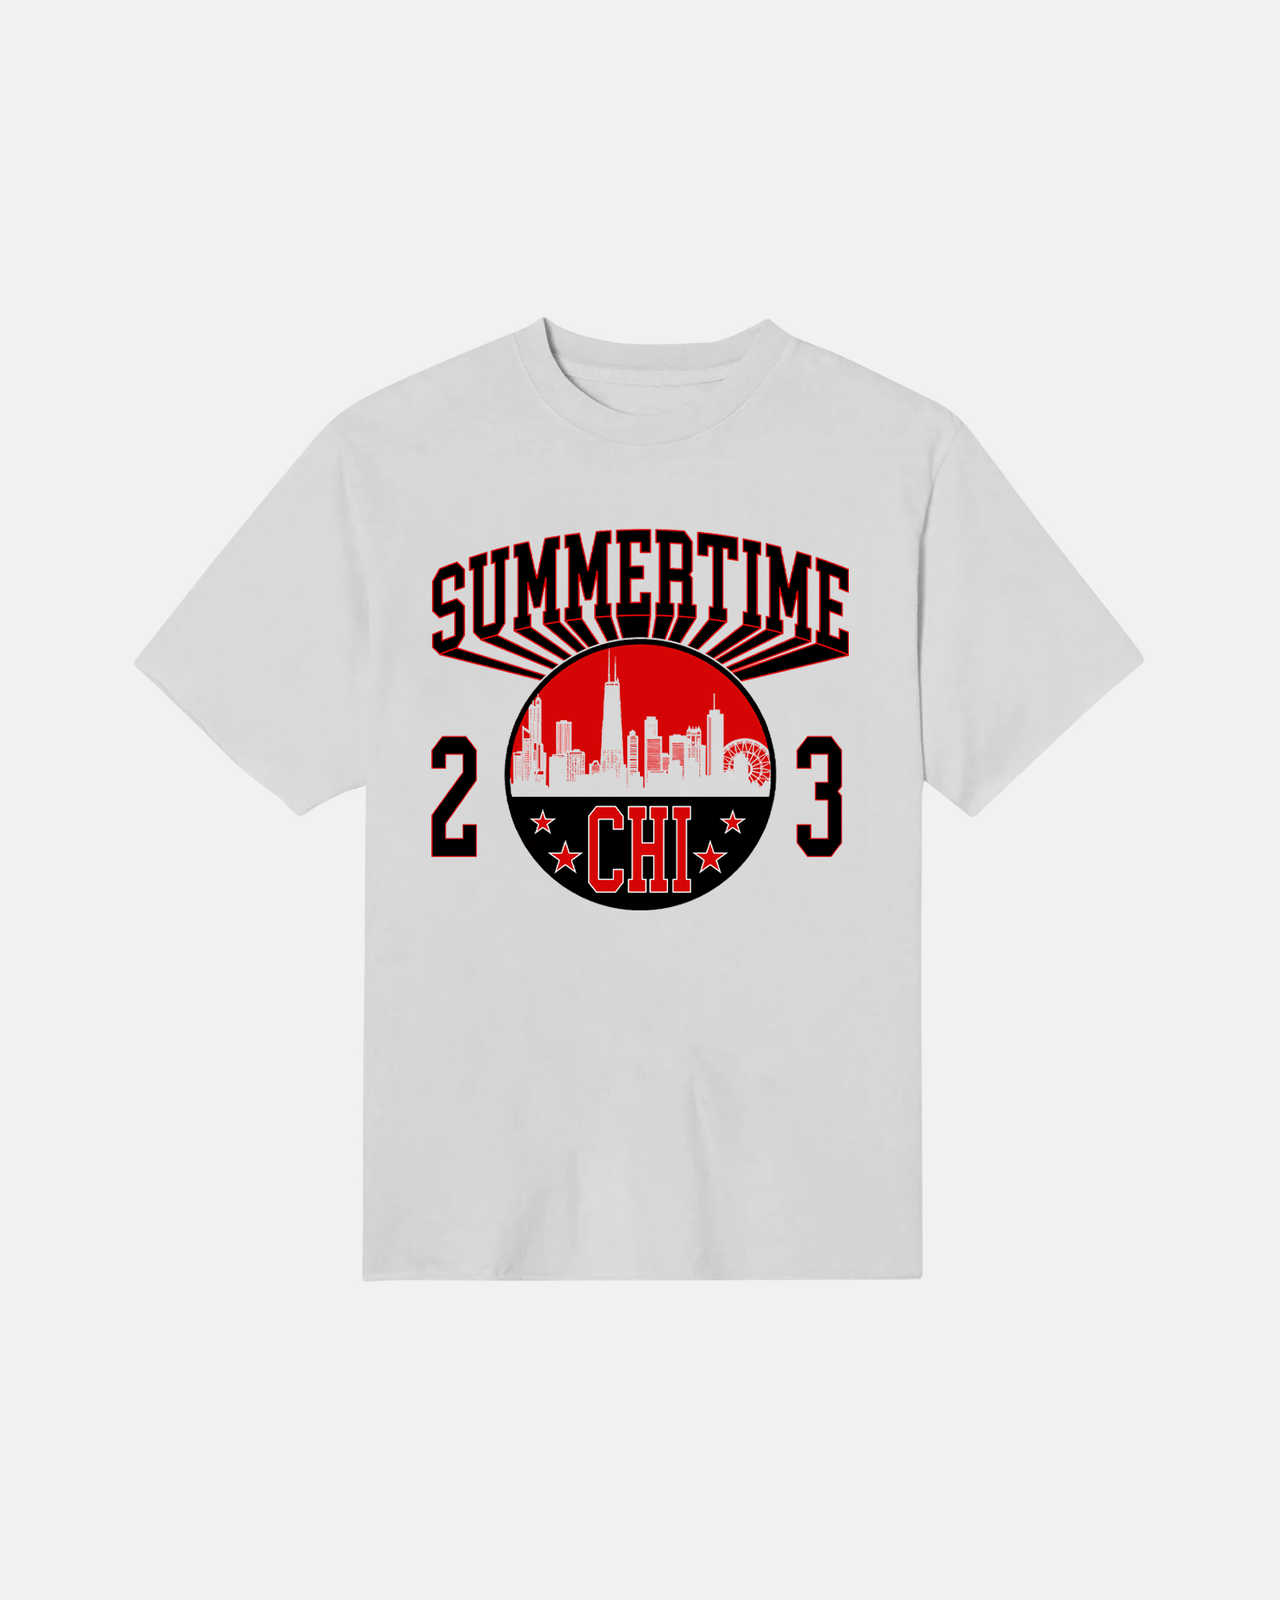 Summertime CHI 23 Tee